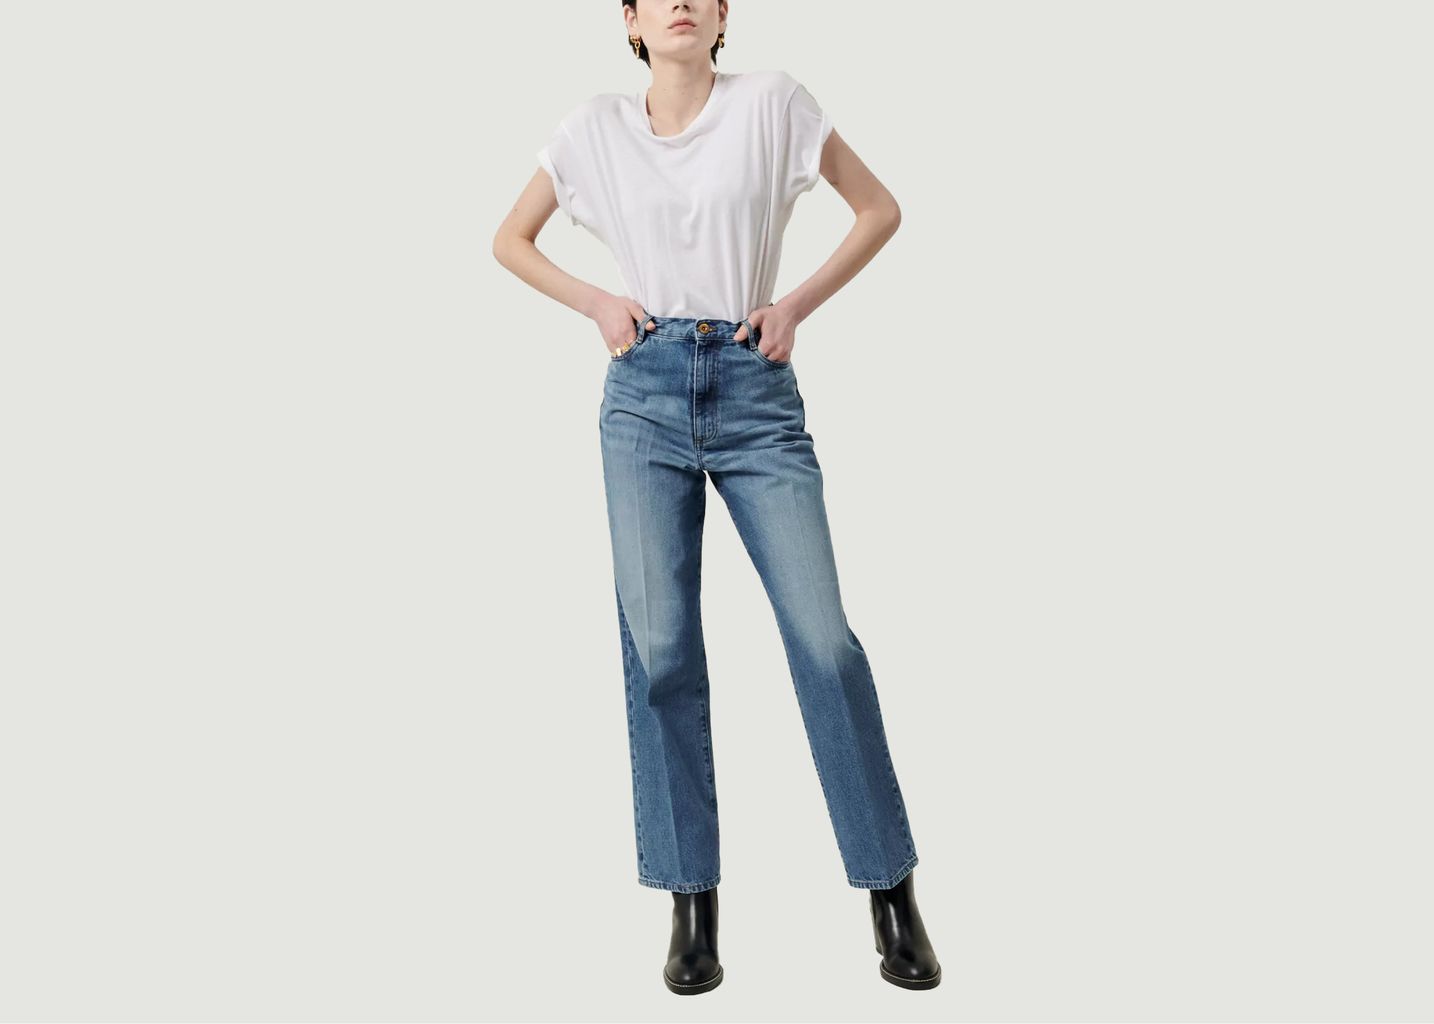 Sessun Bay Cruise Jeans: